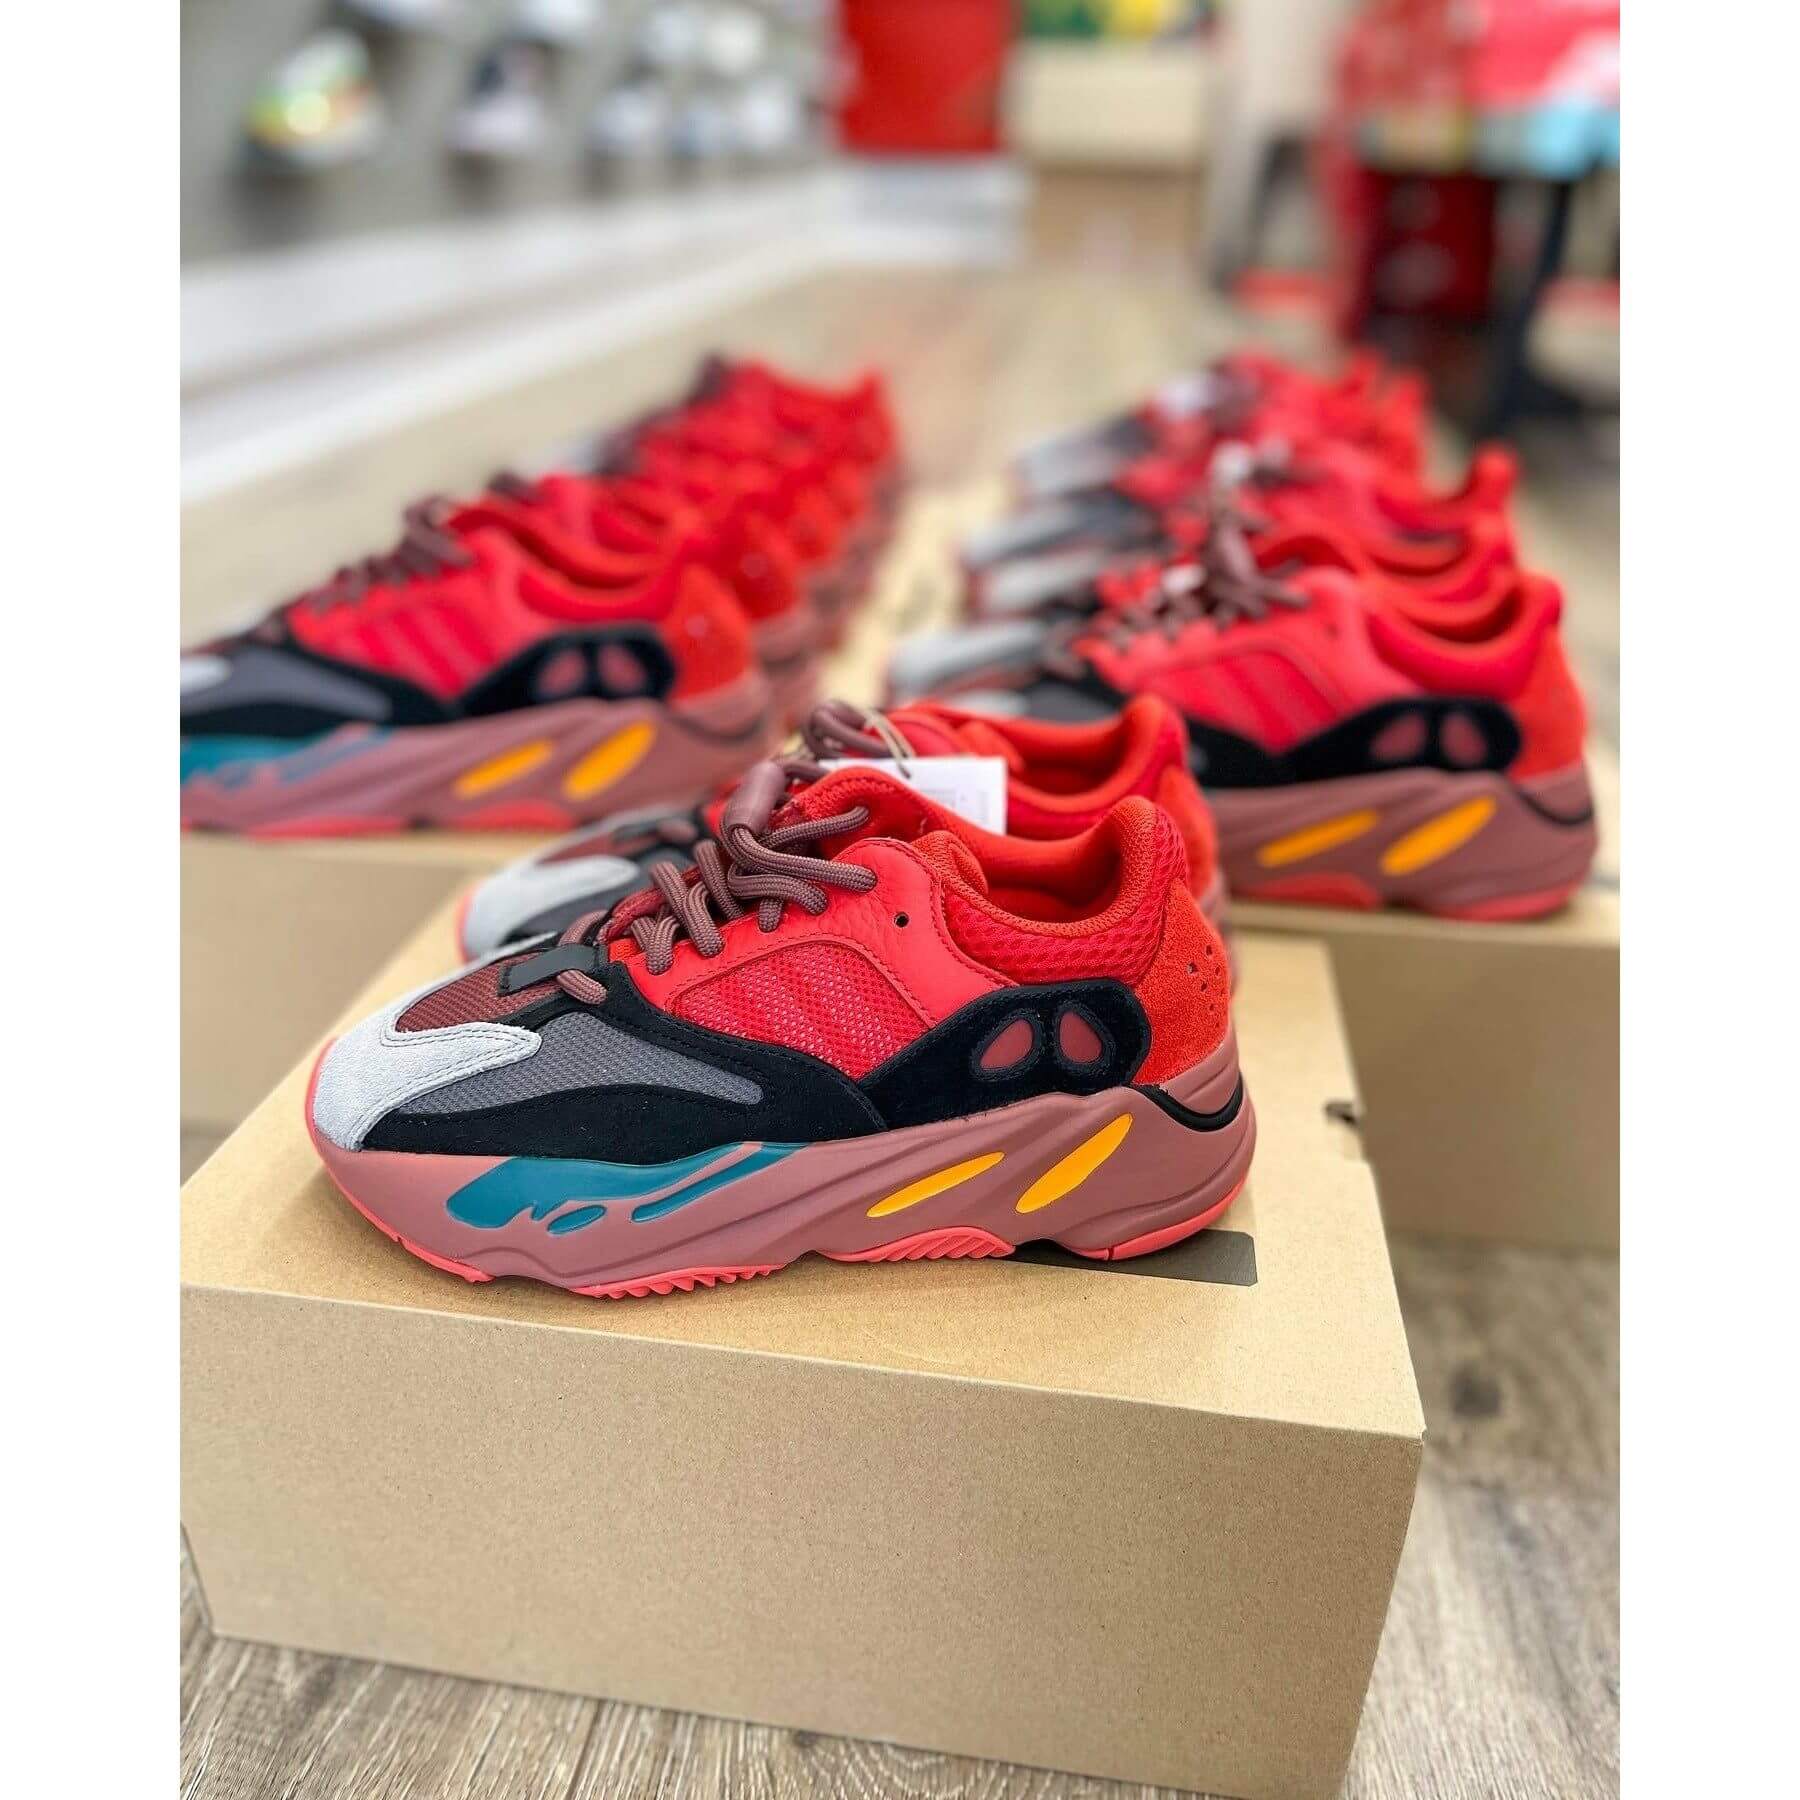 adidas Yeezy Boost 700 Hi-Res Red by Yeezy from £300.00